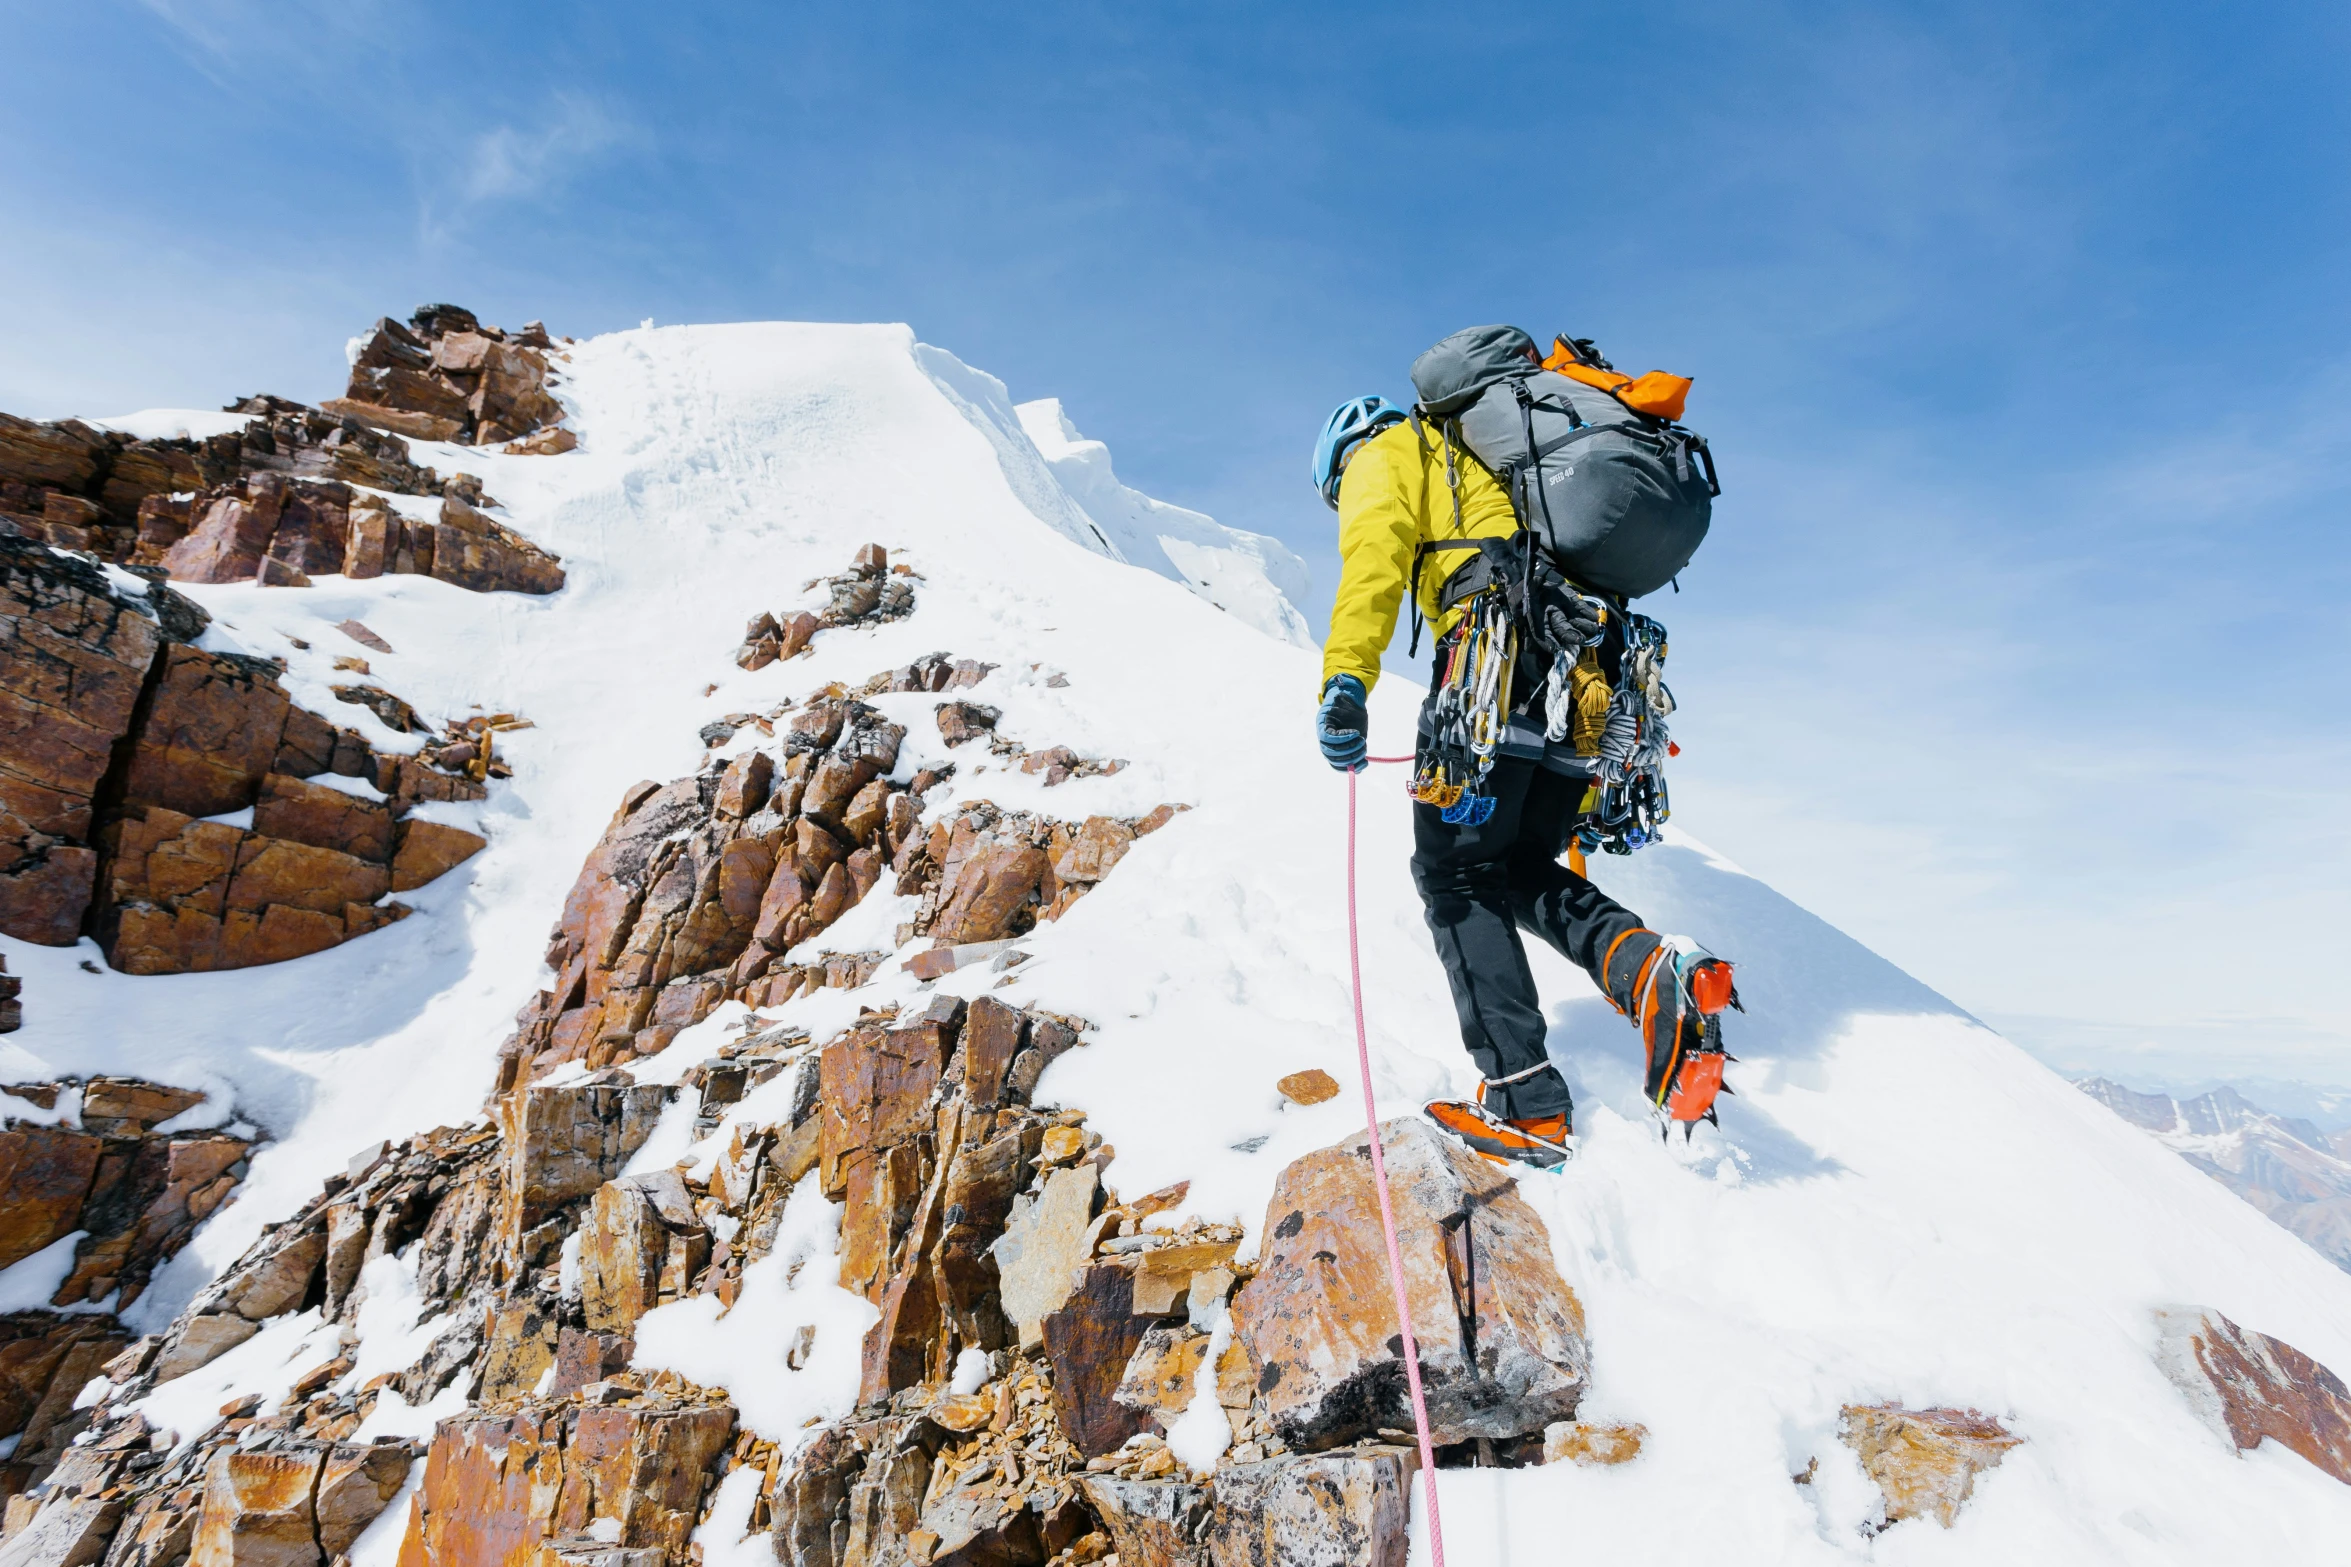 a climber walking on the snow next to the rocky mountain